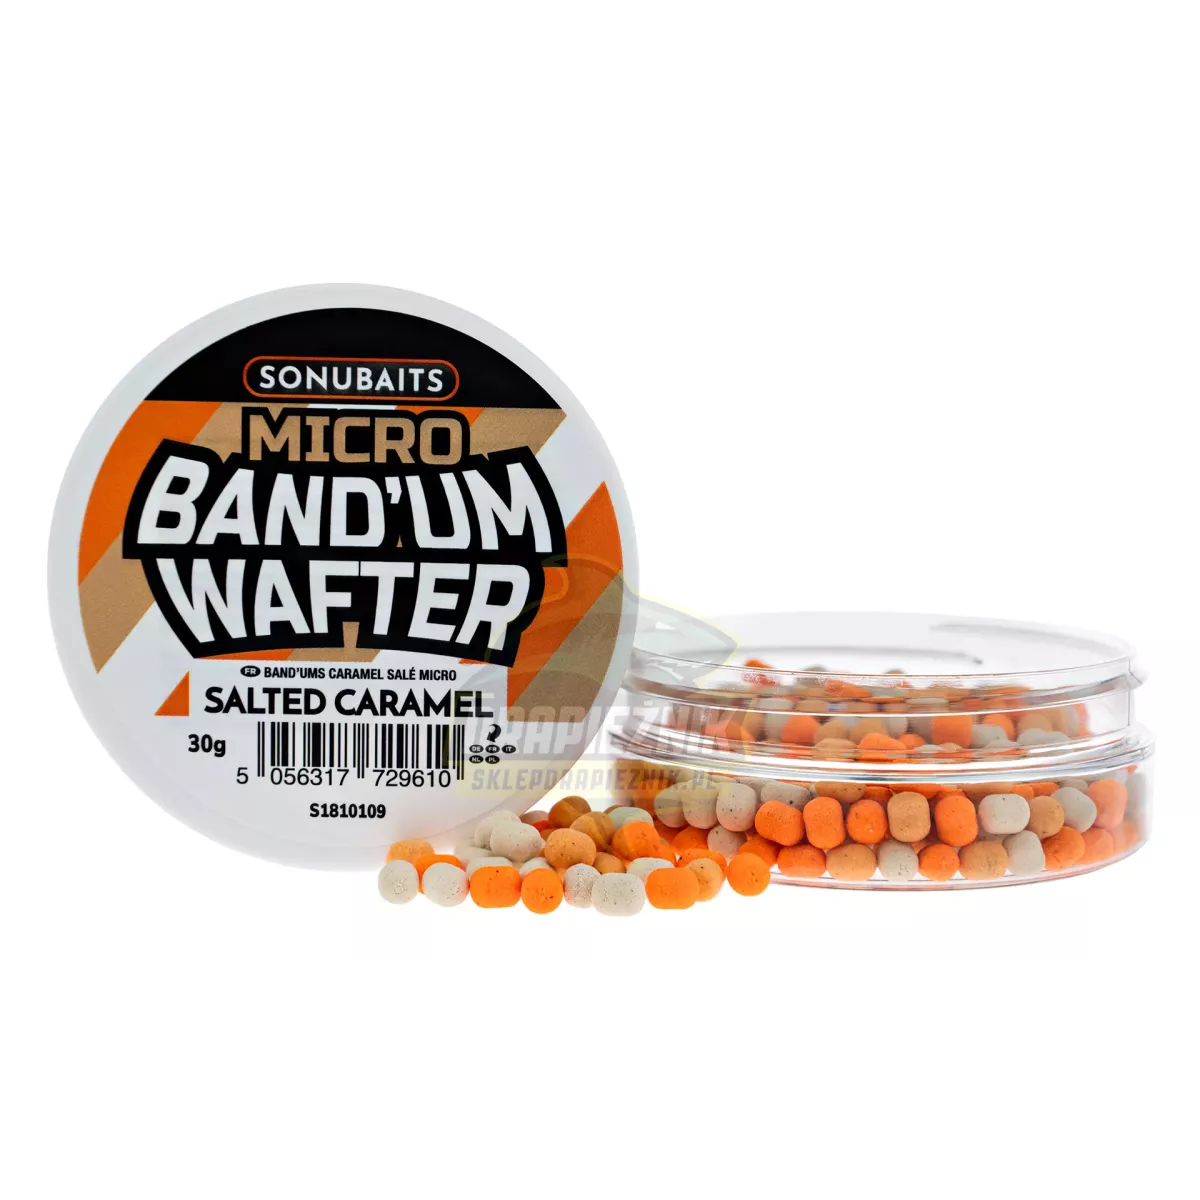 S1810109 Sonubaits Band'Um Wafters Micro - Salted Caramel